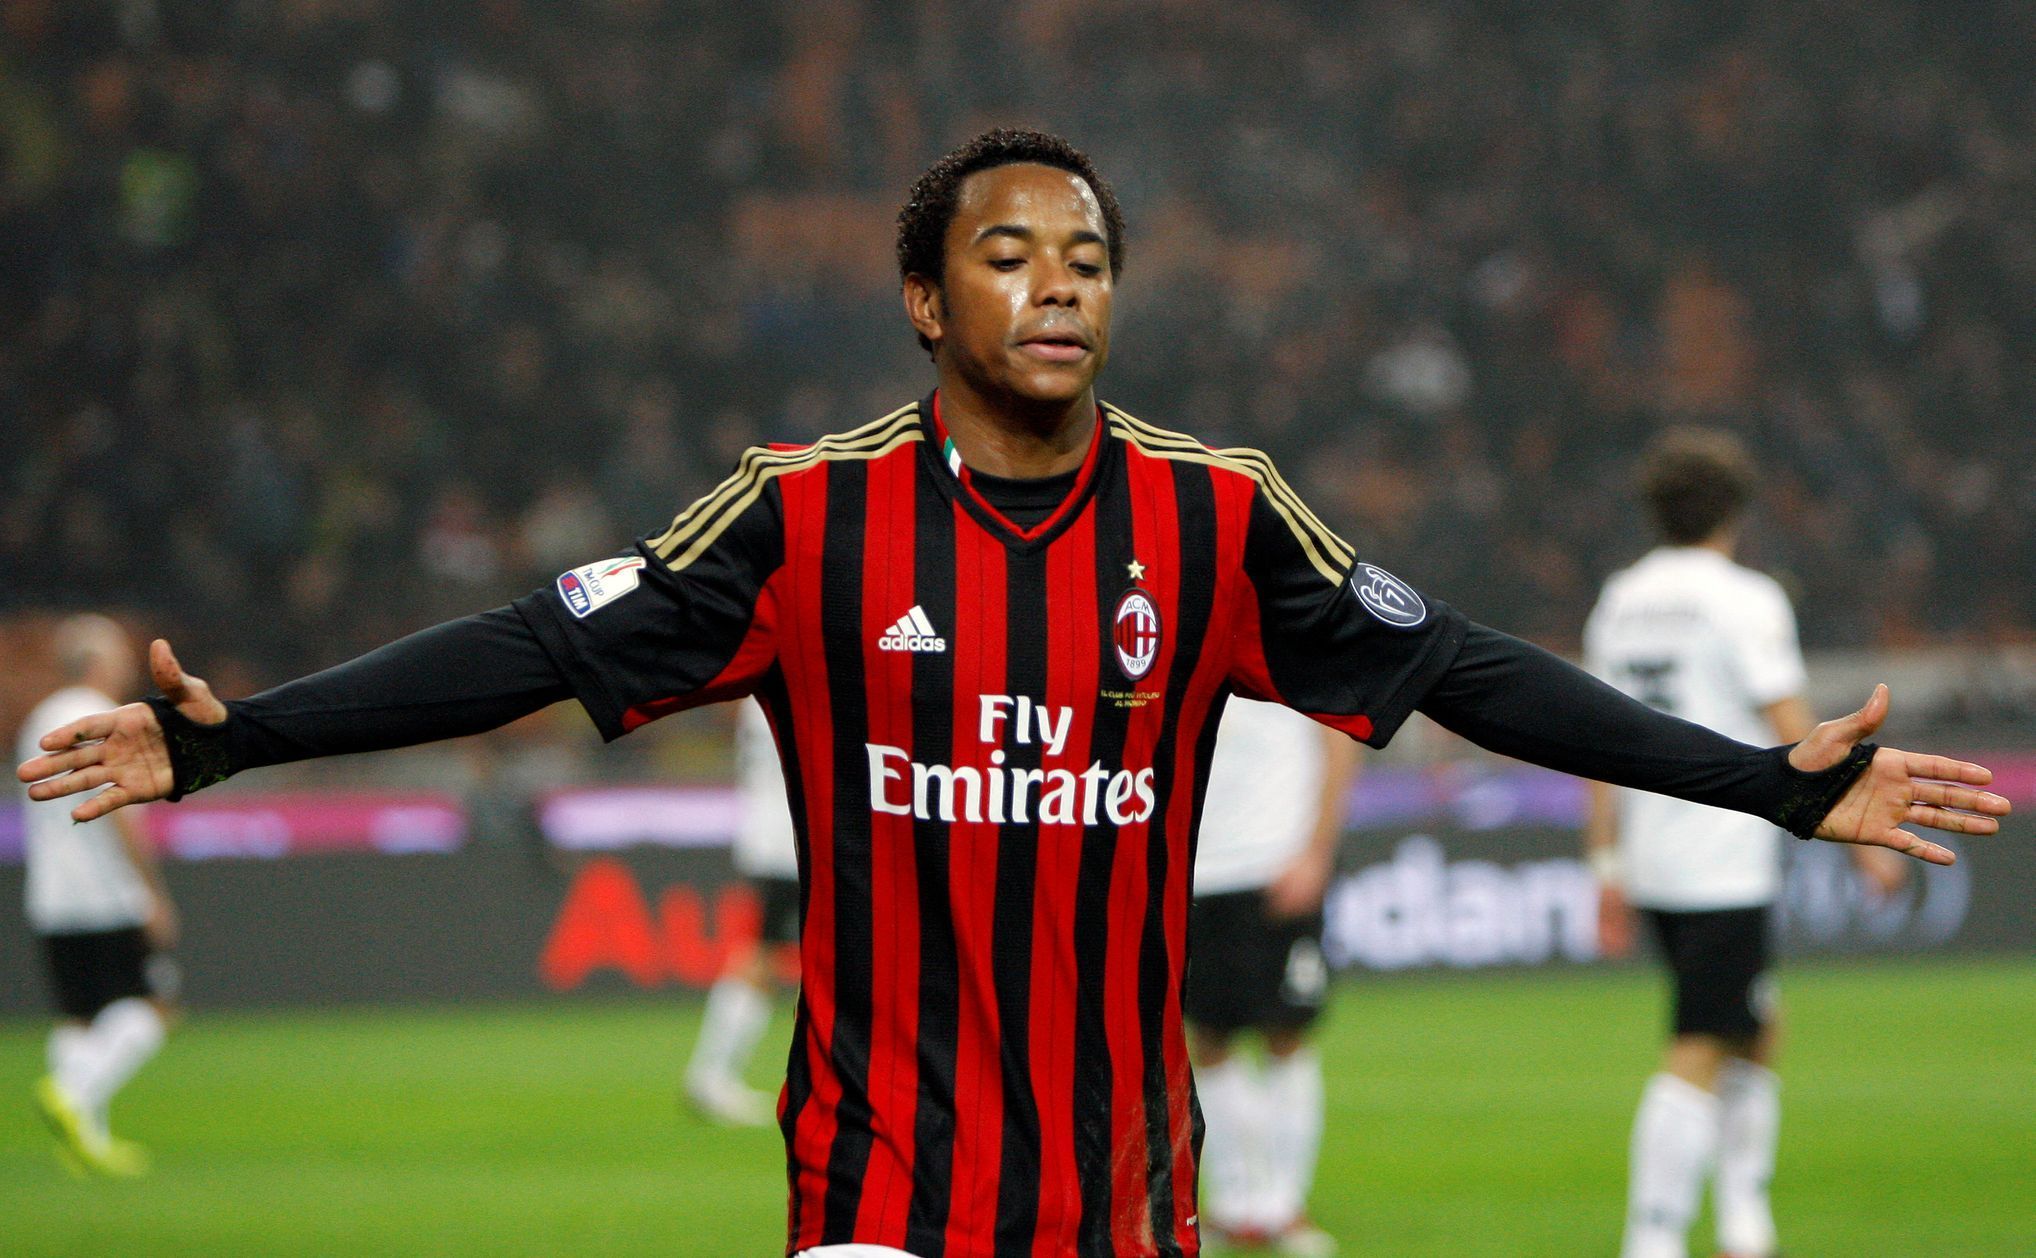 FILE PHOTO: AC Milan's Robinho celebrates after scoring against Spezia during their Italian Cup match in Milan